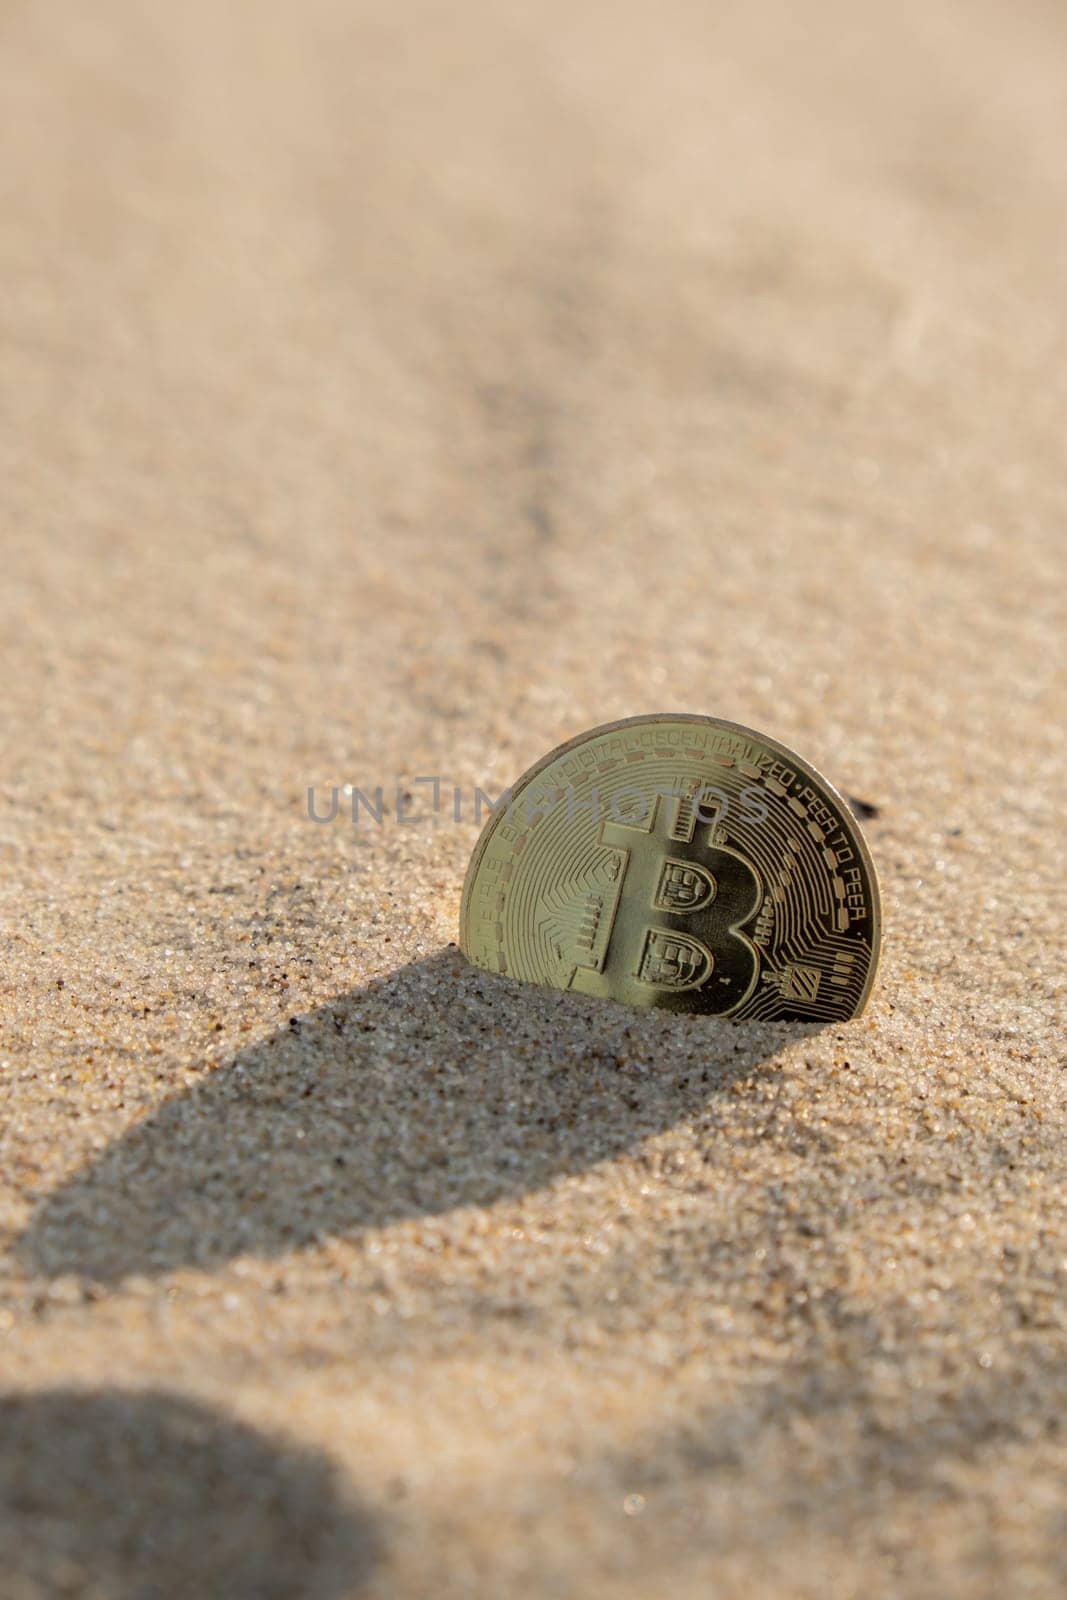 Bitcoin Coin cryptocurrency In Sand On Beach. Freelance, stock exchange BTC sign Concept mining bitcoin for holidays and vacation. Payment For Nature And Unlimited Possibilities. Copy Space Worldwide digital money and stock business